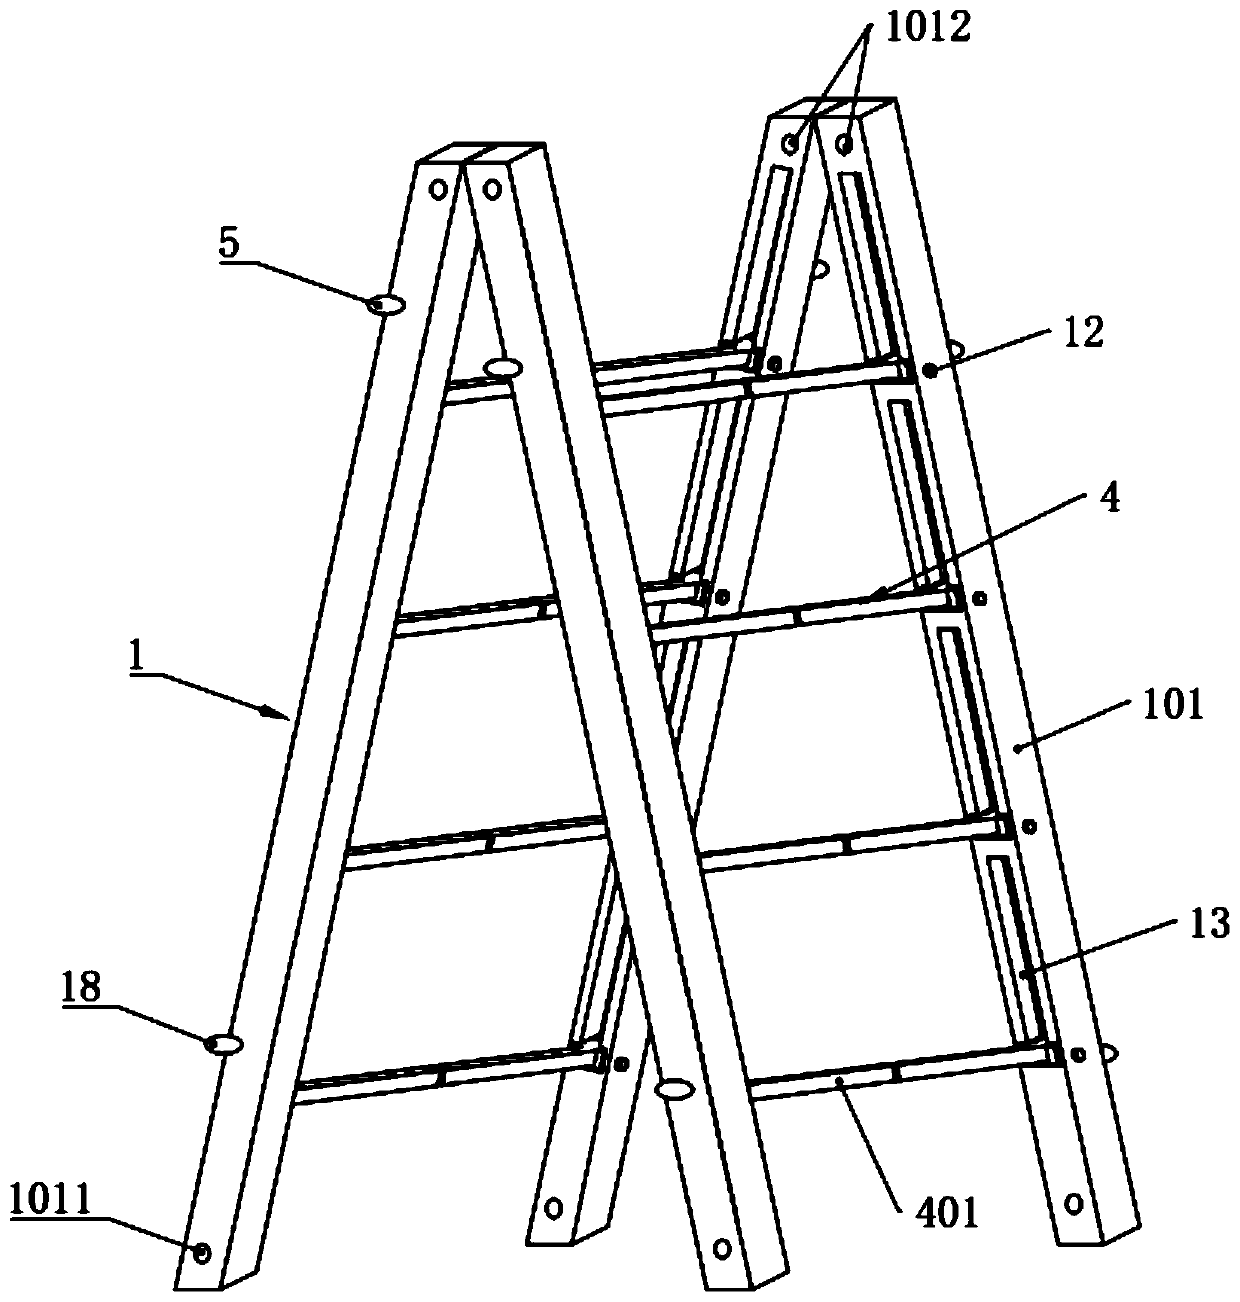 A portable insulating ladder platform that can be assembled